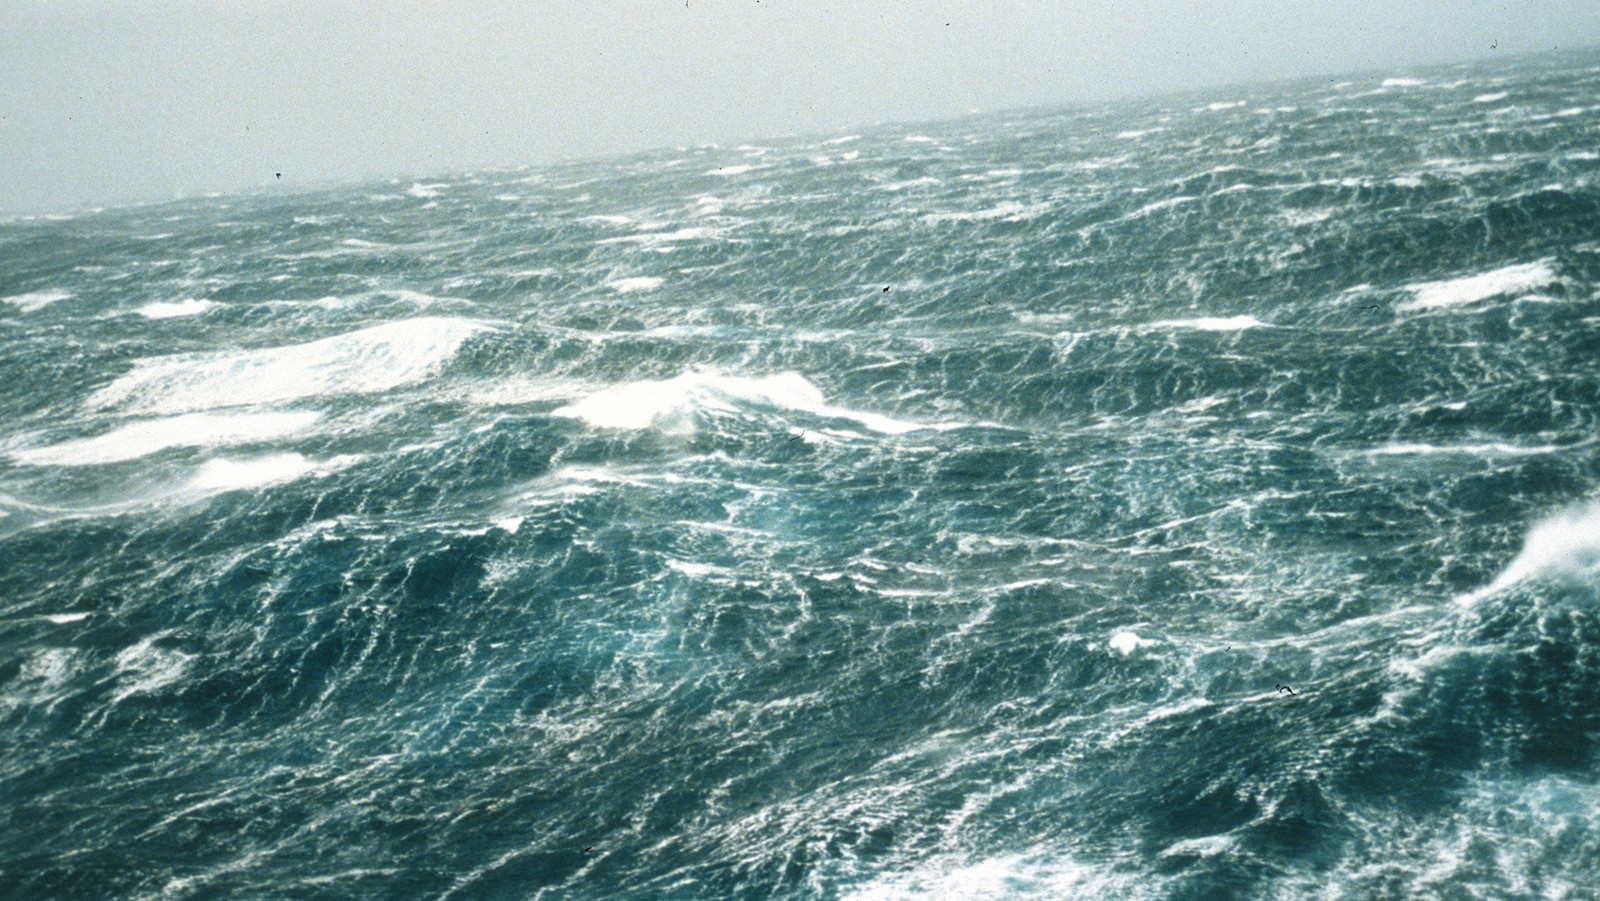 North Pacific storm waves as seen from the M/V NOBLE STAR. Ocean observations are an important component of the 2023 Hurricane Field Program Photo credit: NWS